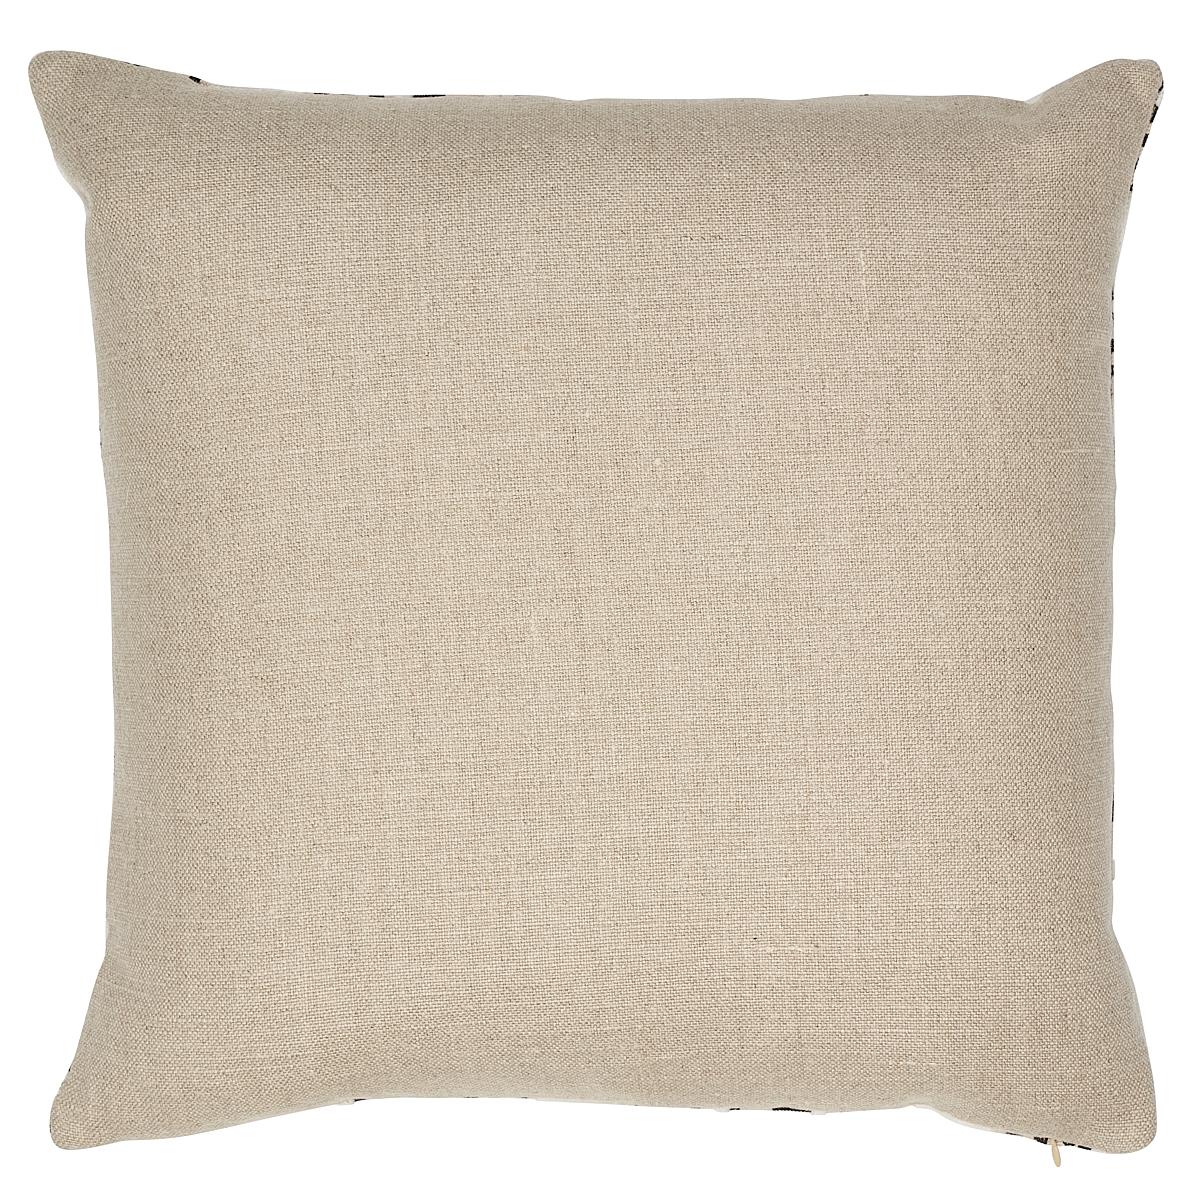 This pillow features Le Moderne Cut Velvet by Johnson Hartig for Schumacher with a knife edge finish. A geometric floral motif with an Art Deco echo, Le Moderne Cut Velvet in neutral is a gorgeous textural fabric design by Johnson Hartig of